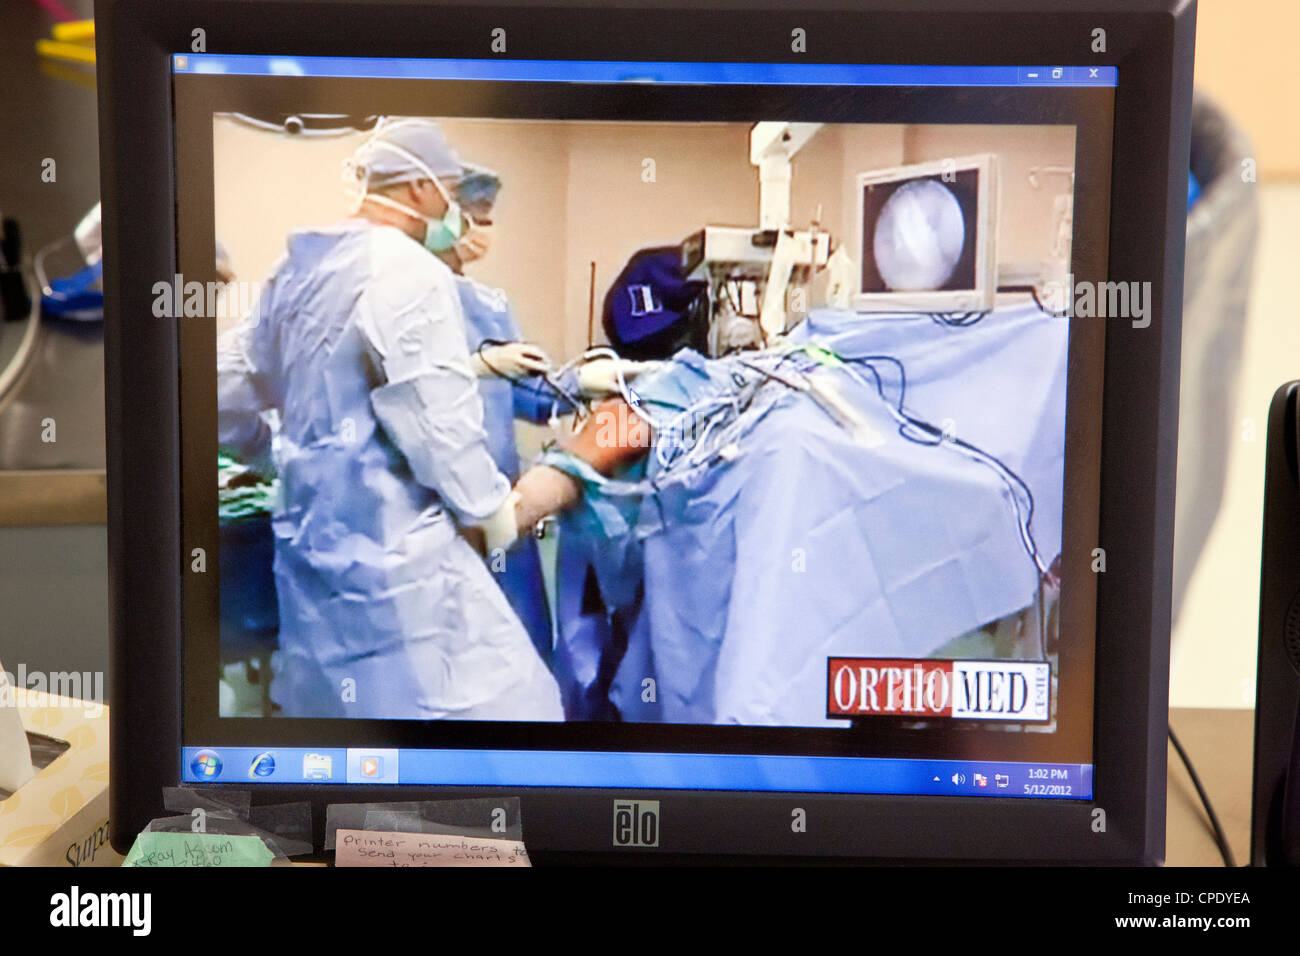 Arthroscopic knee surgery displayed on a hospital operating room computer monitor Stock Photo